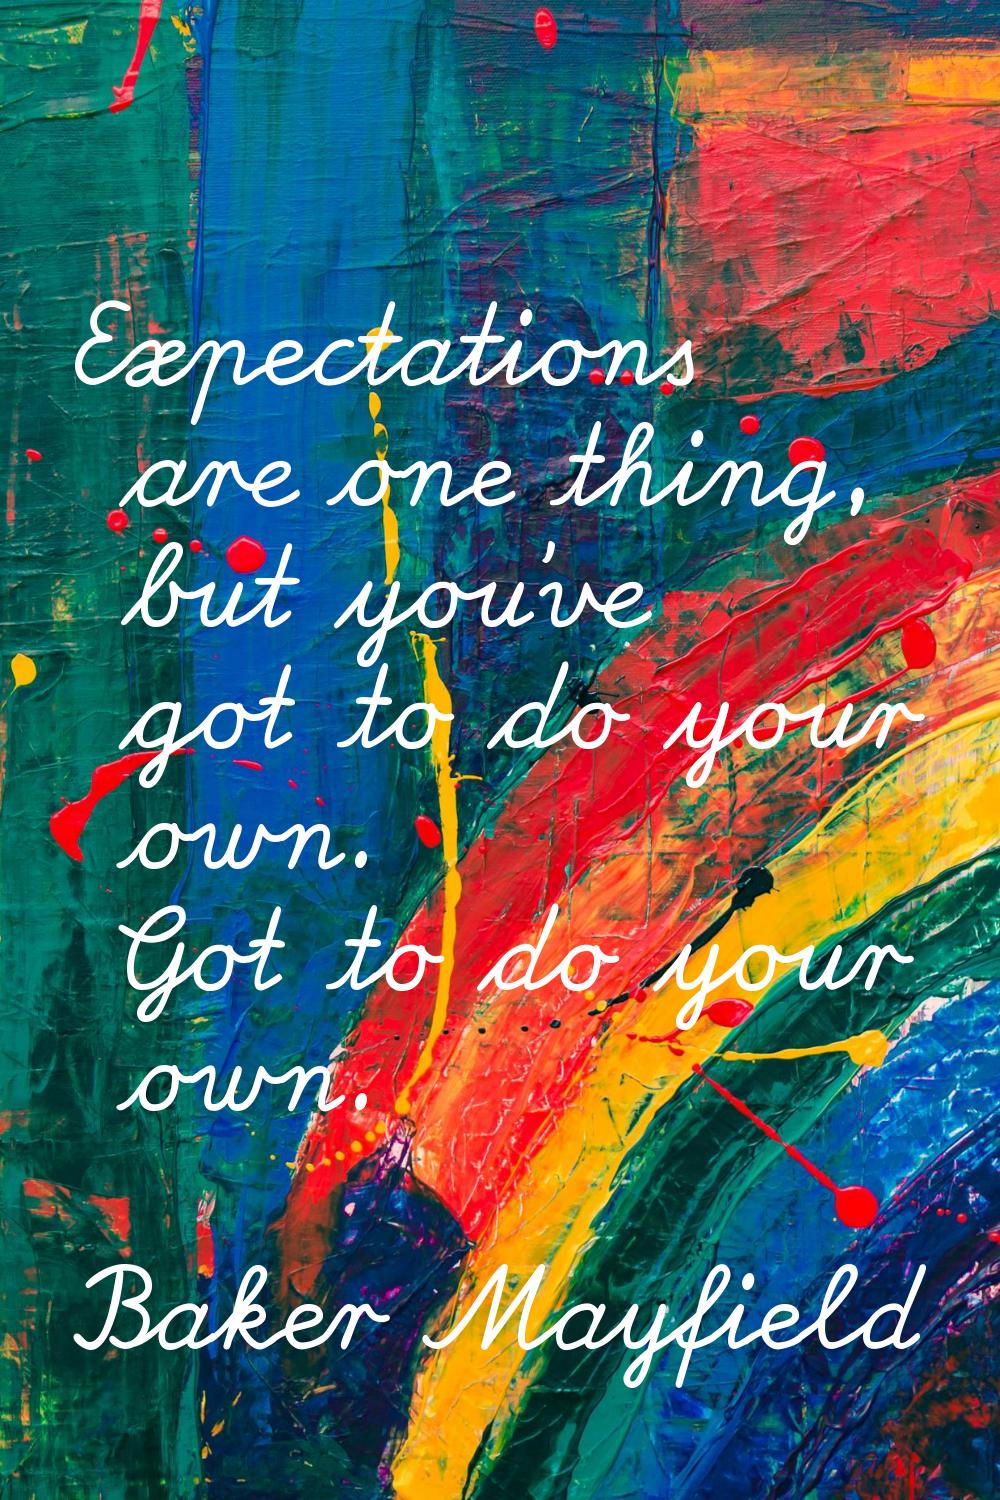 Expectations are one thing, but you've got to do your own. Got to do your own.